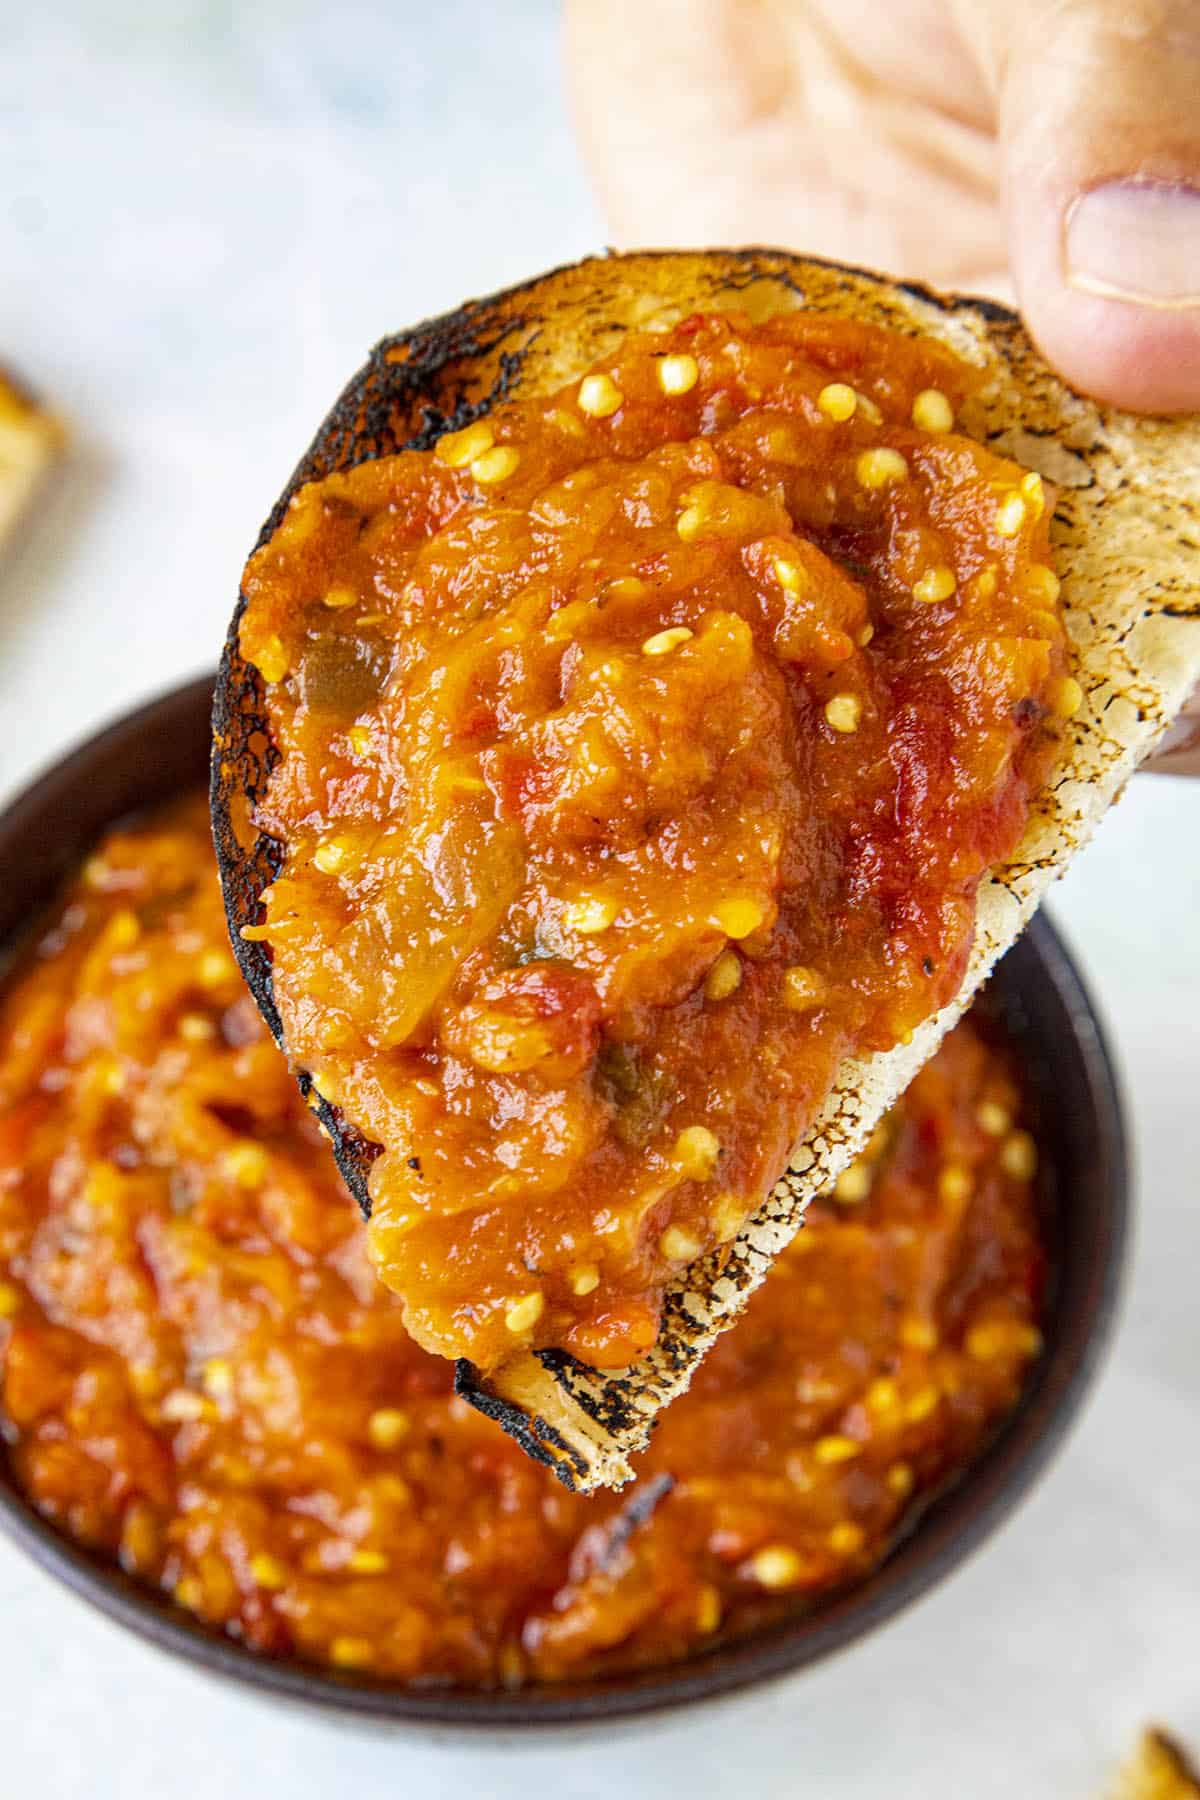 Thick and delicious Zacusca (roasted red pepper and eggplant spread) on a charred piece of bread